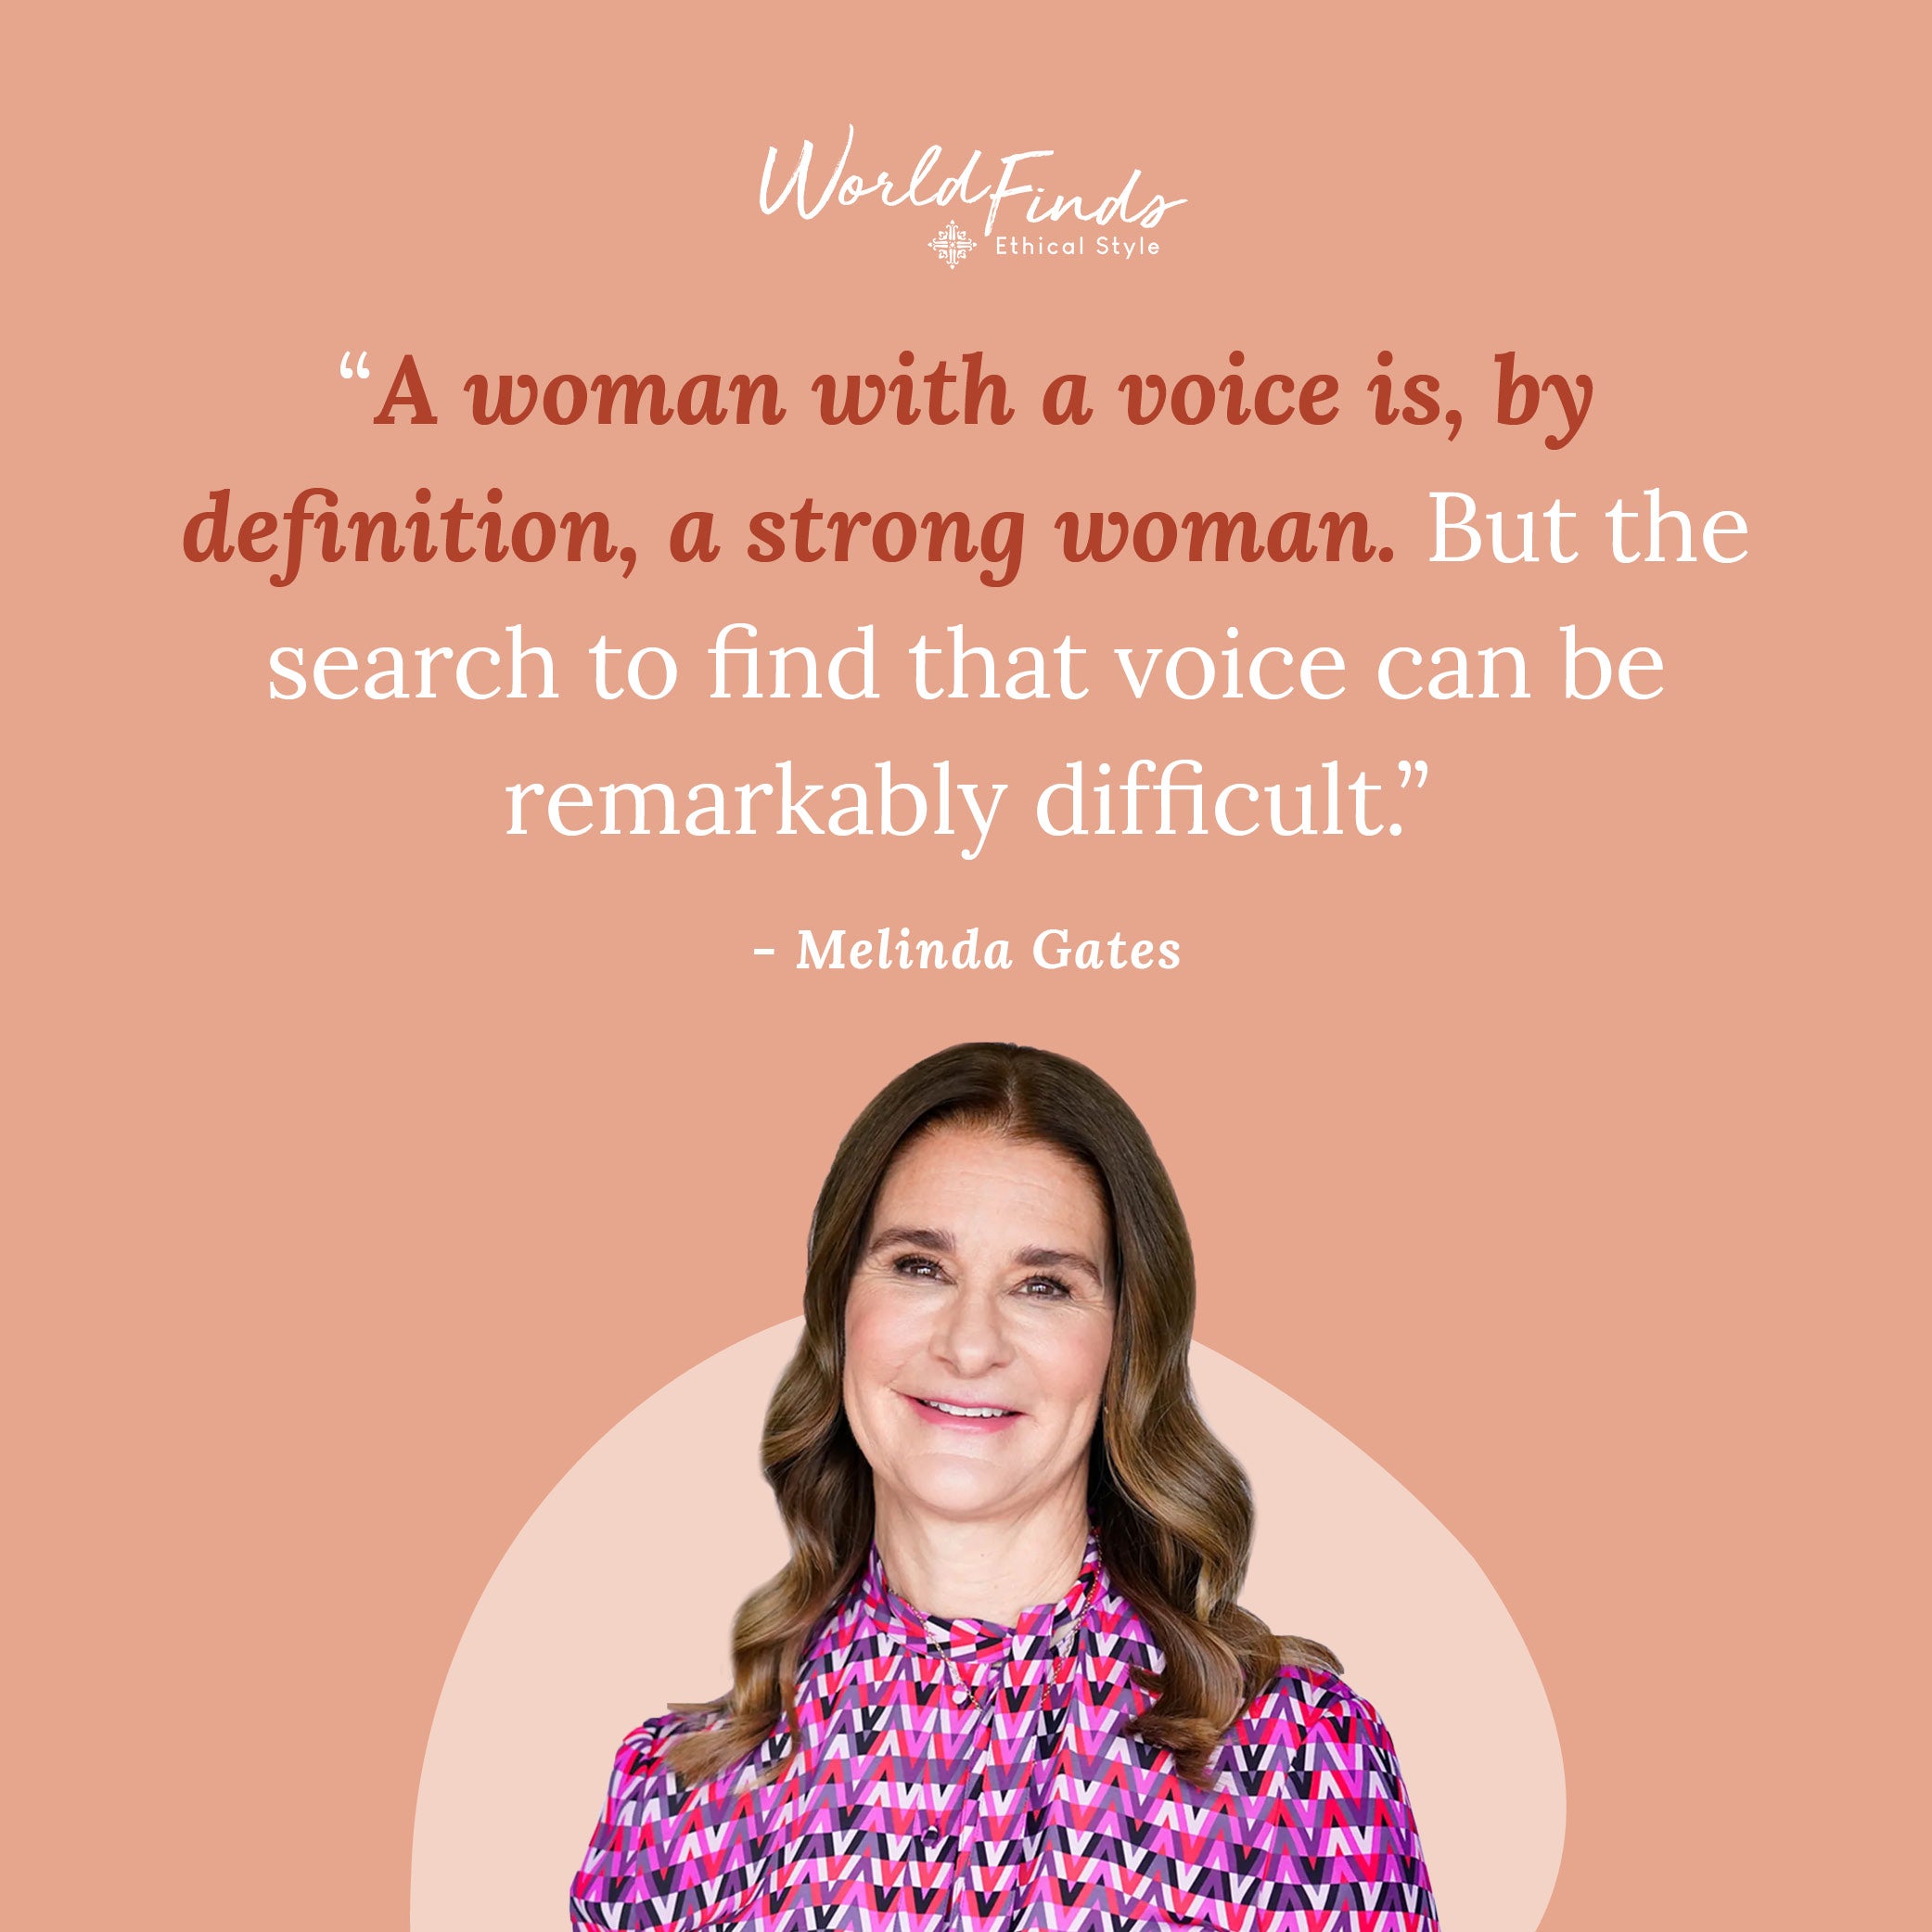 Quote from Melinda Gates, "A woman with a voice is, by definition, a strong woman. But the search to find that voice can be remarkably difficult."